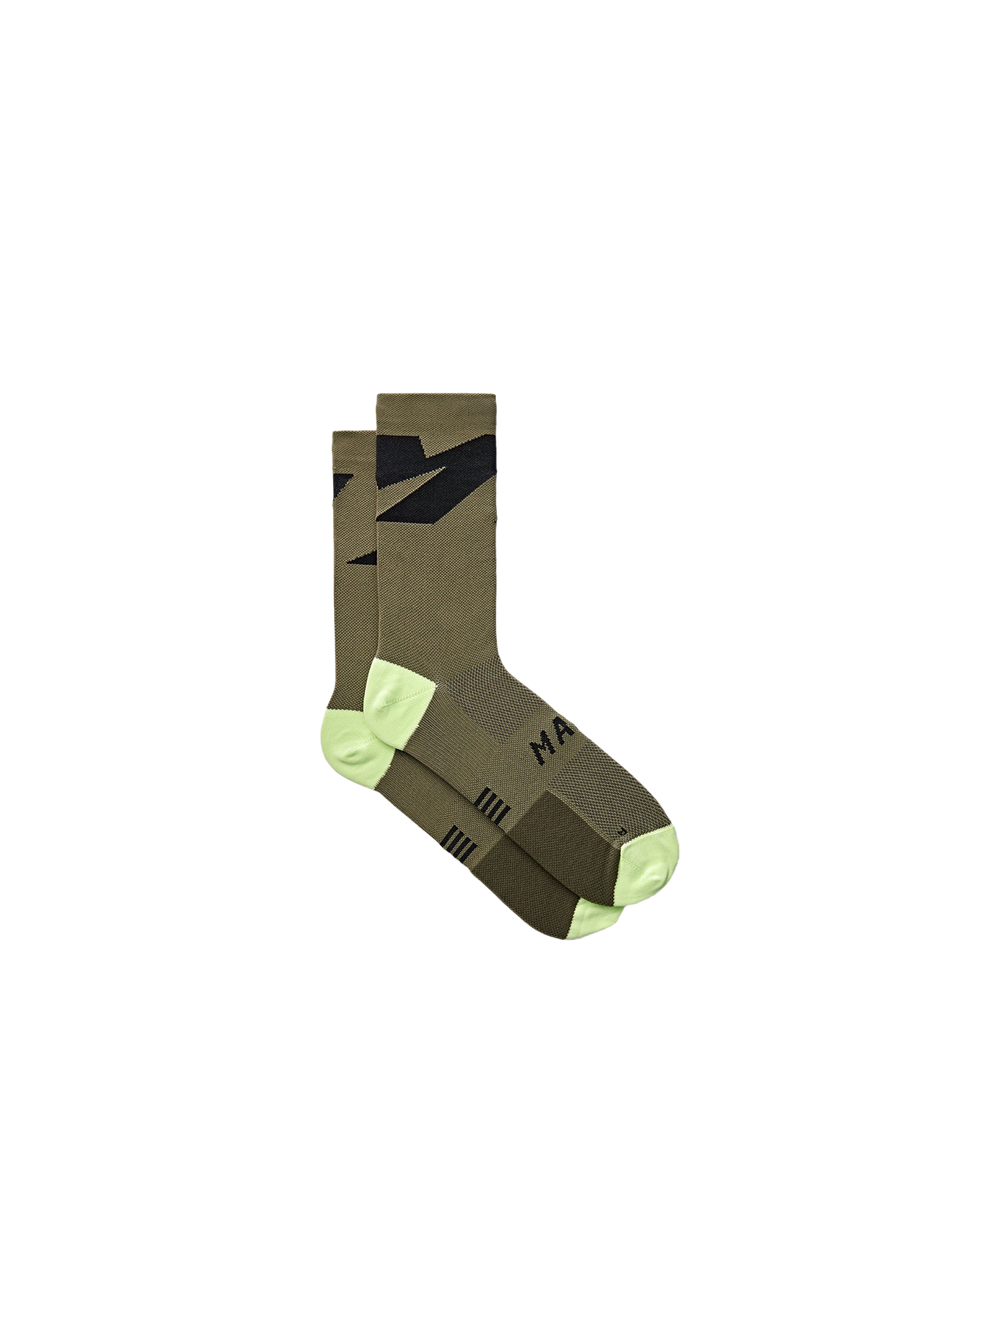 Product Image for Evolve Sock